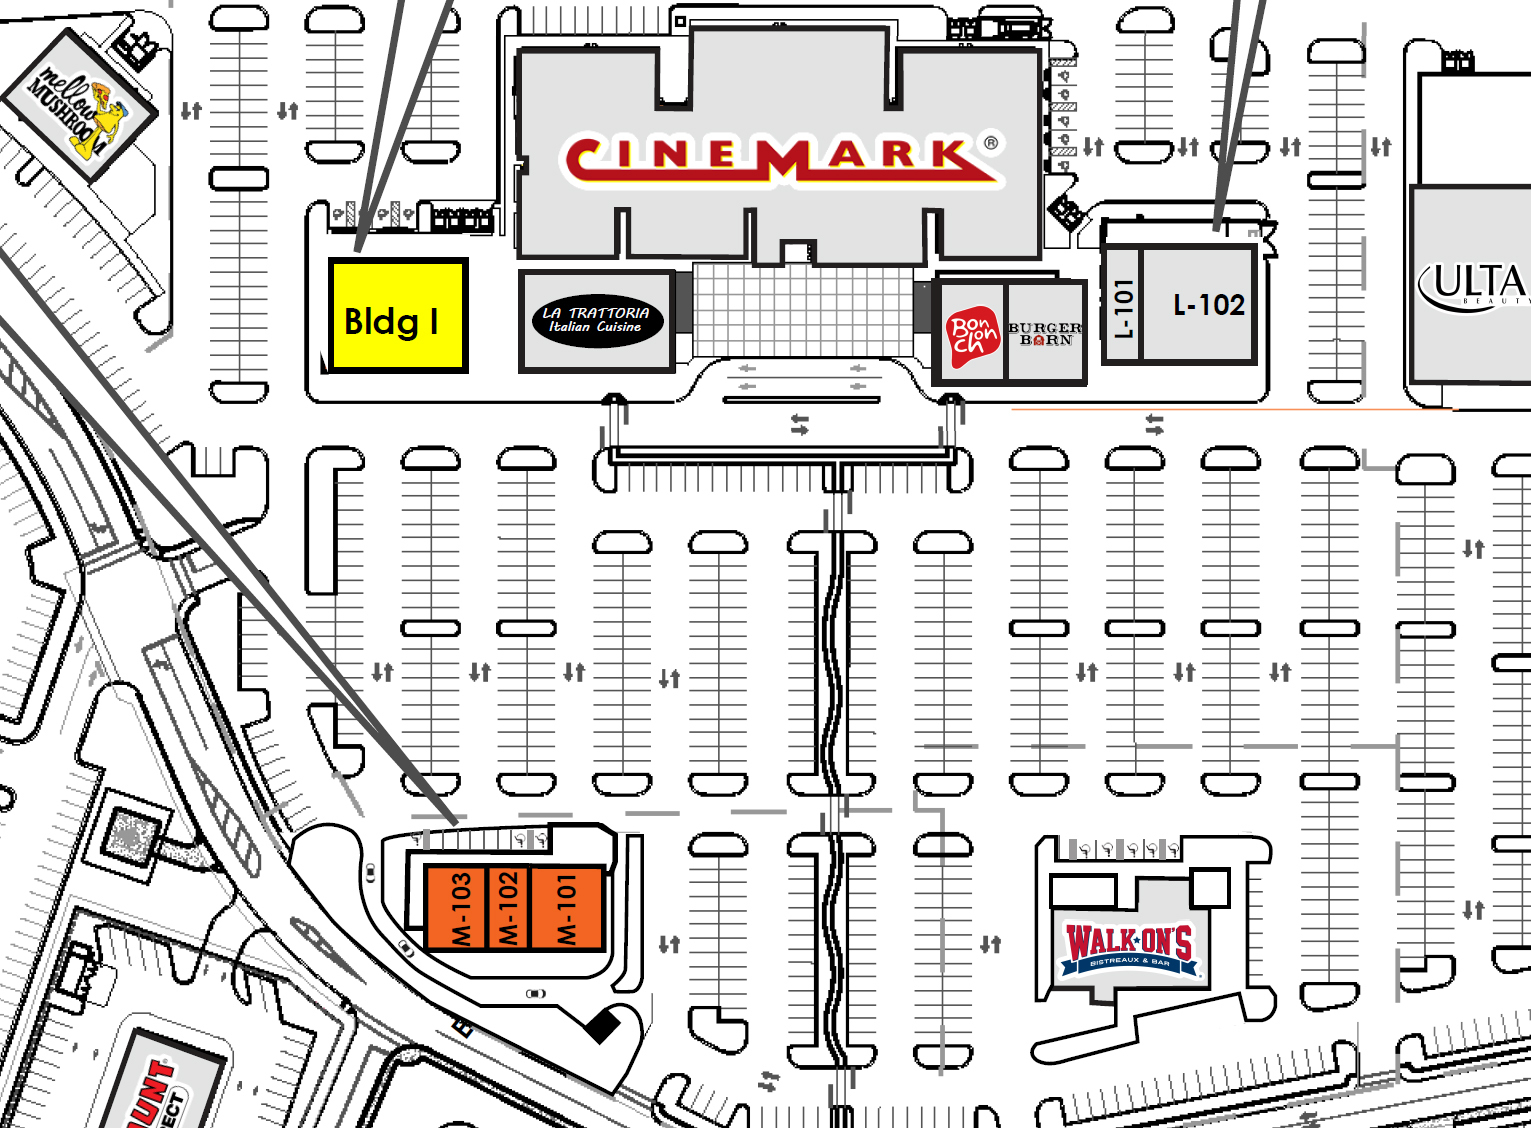 A property site plan shows Walk-On’s in front of the Cinemark Durbin Park & XD theater.